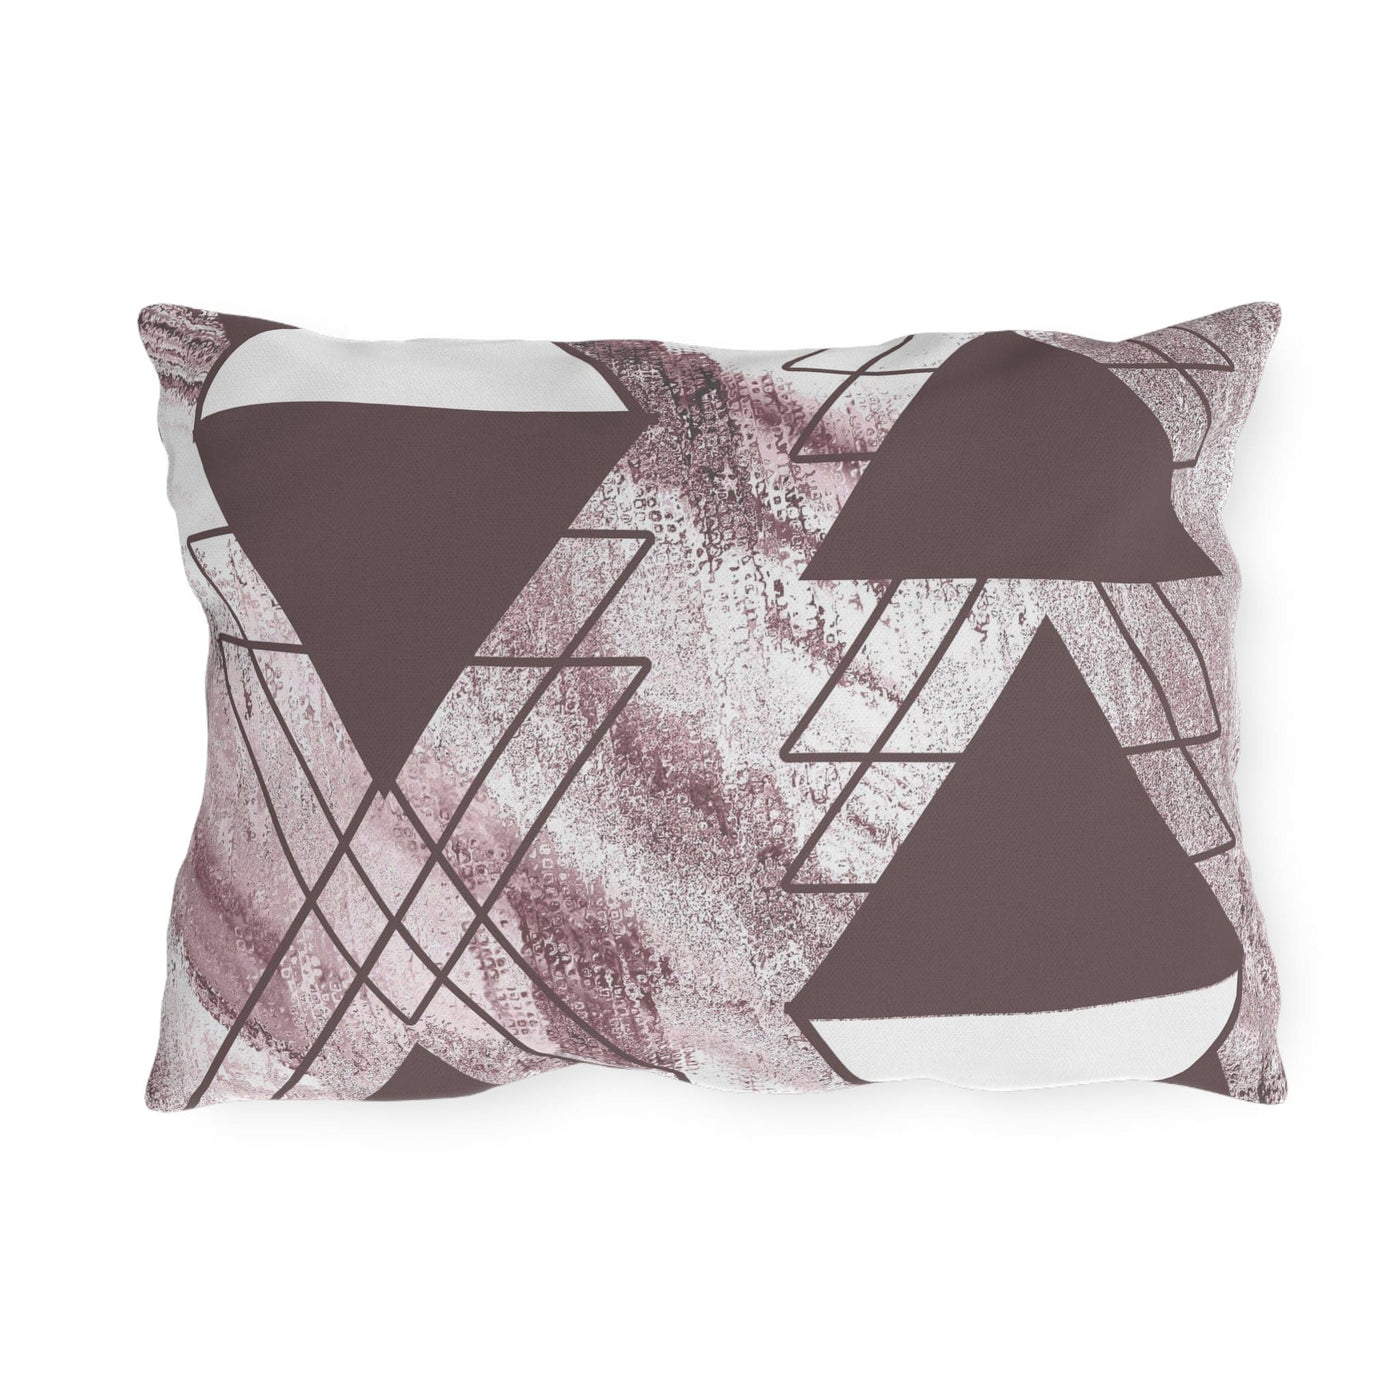 Decorative Outdoor Pillows With Zipper - Set Of 2 Mauve Rose And White